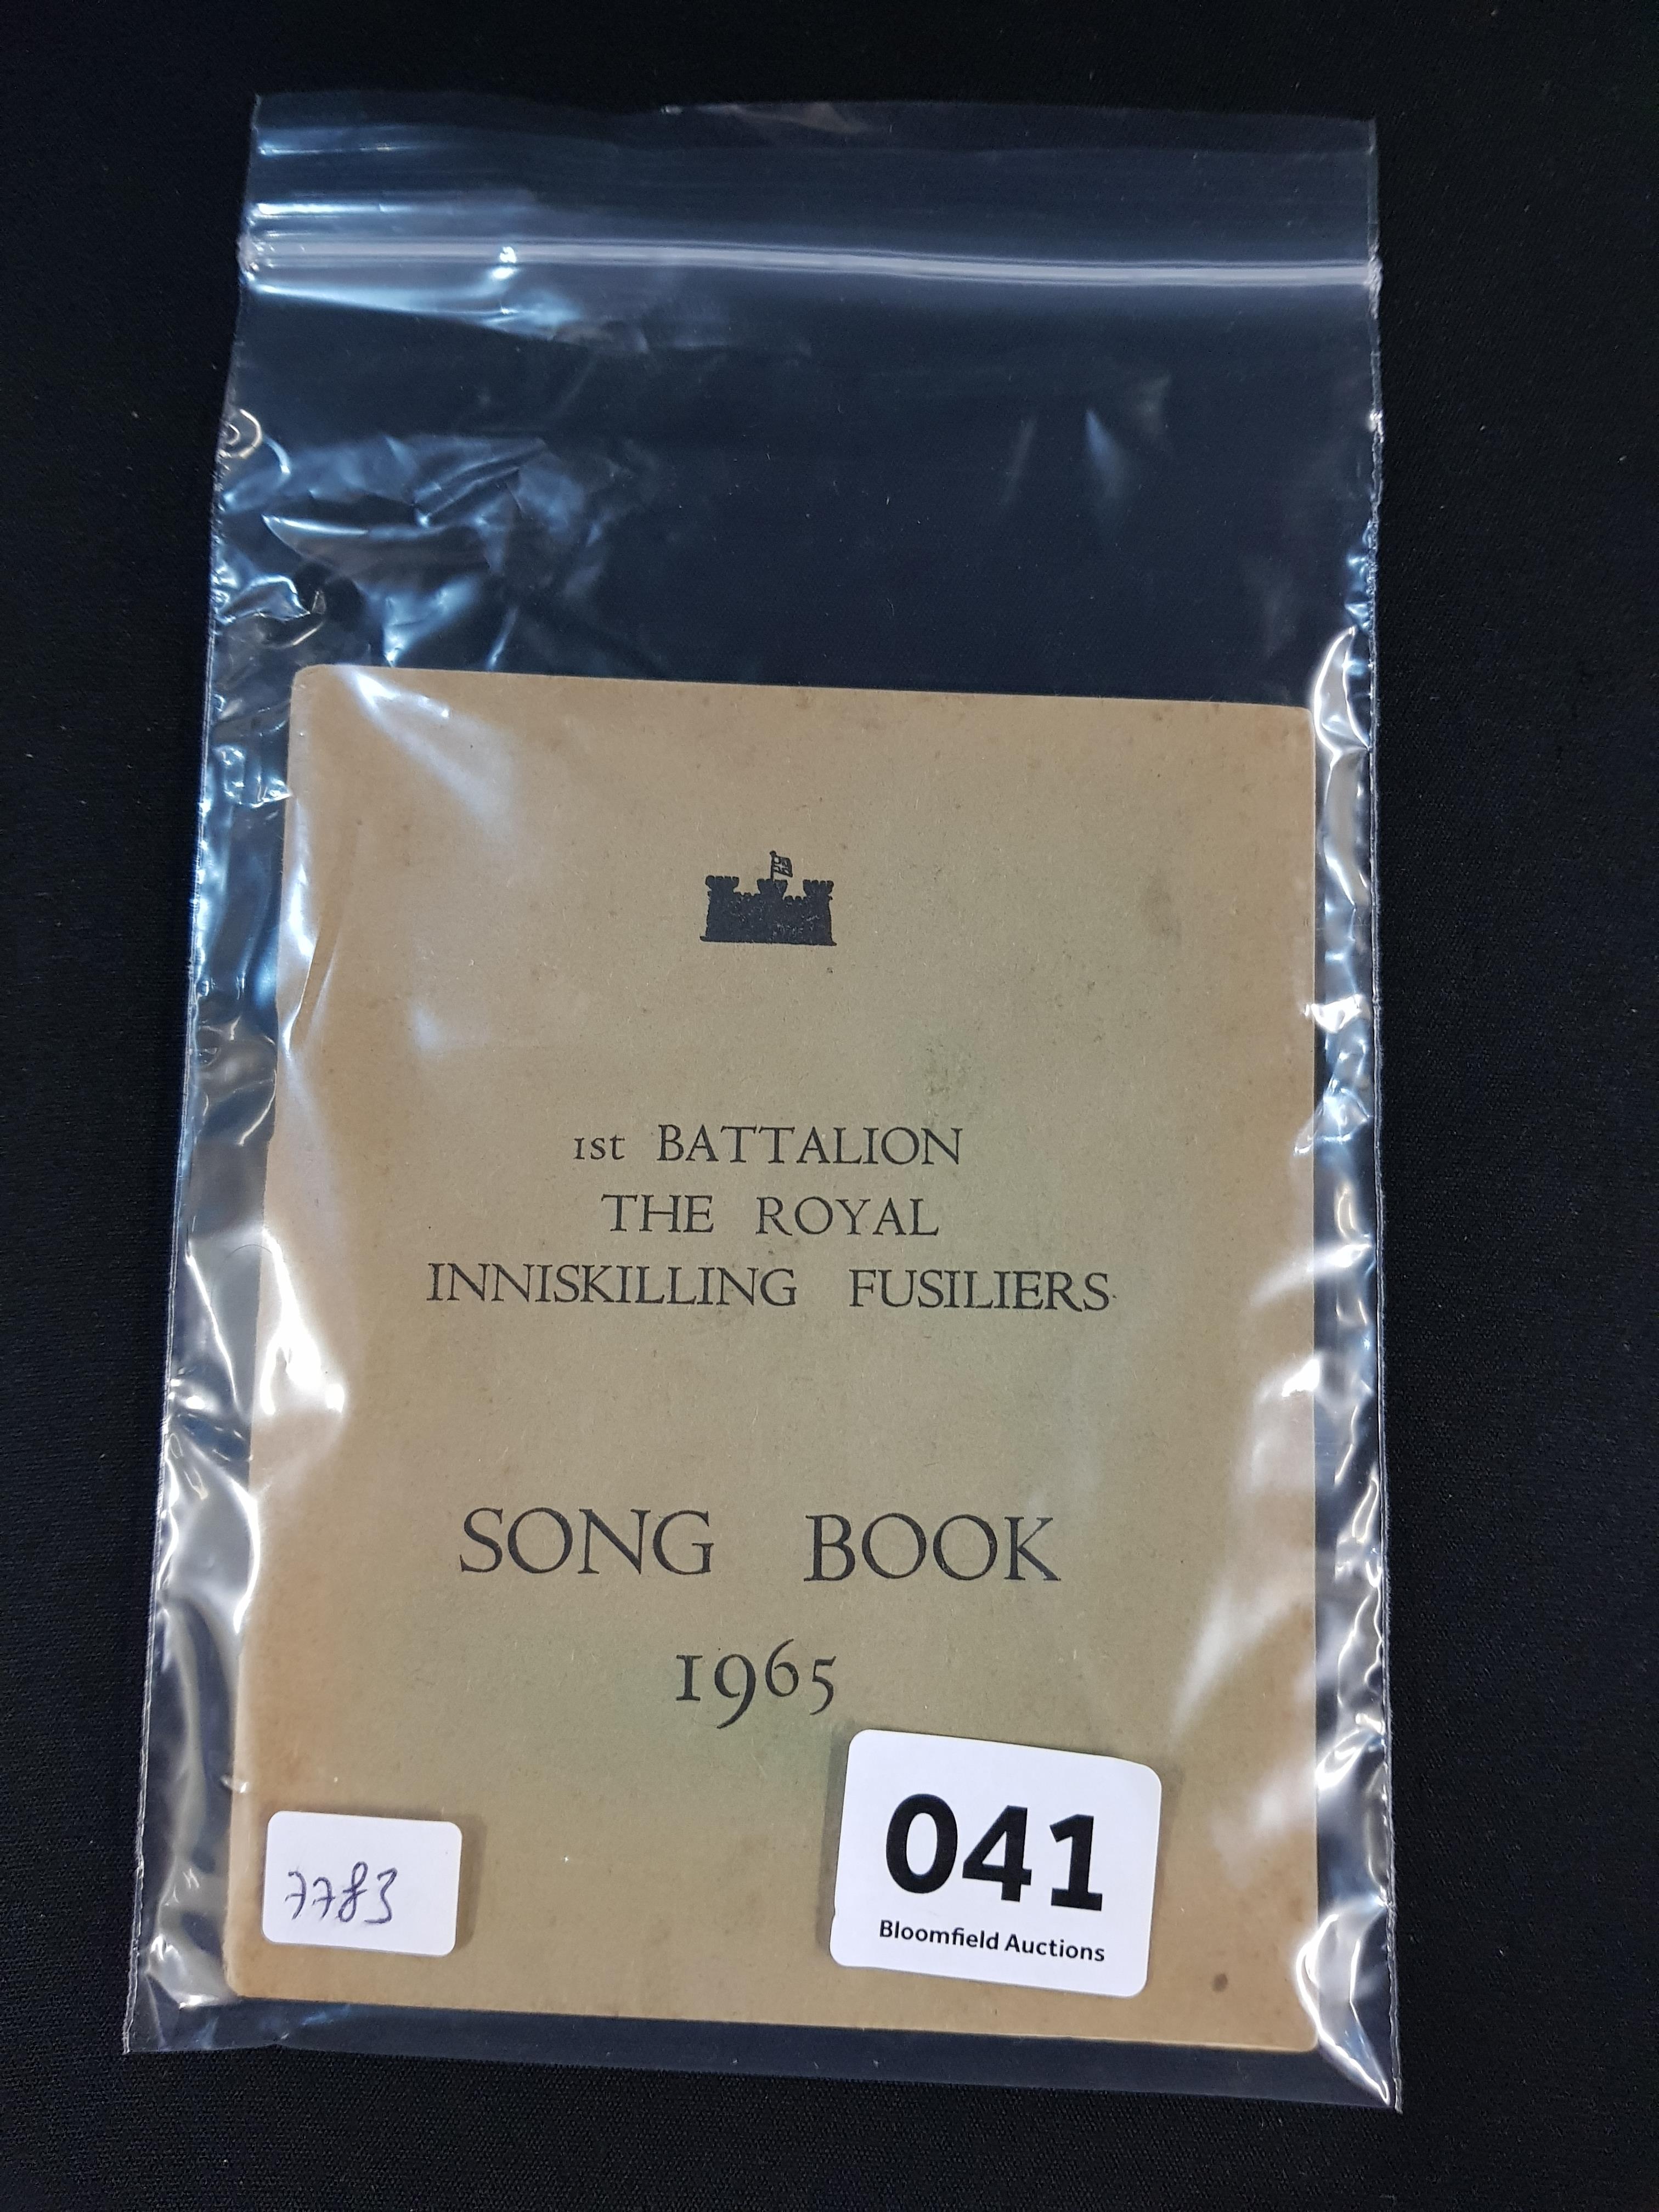 VINTAGE 1ST BATTALION THE ROYAL INNISKILLING FUSILIERS SONG BOOK 1965